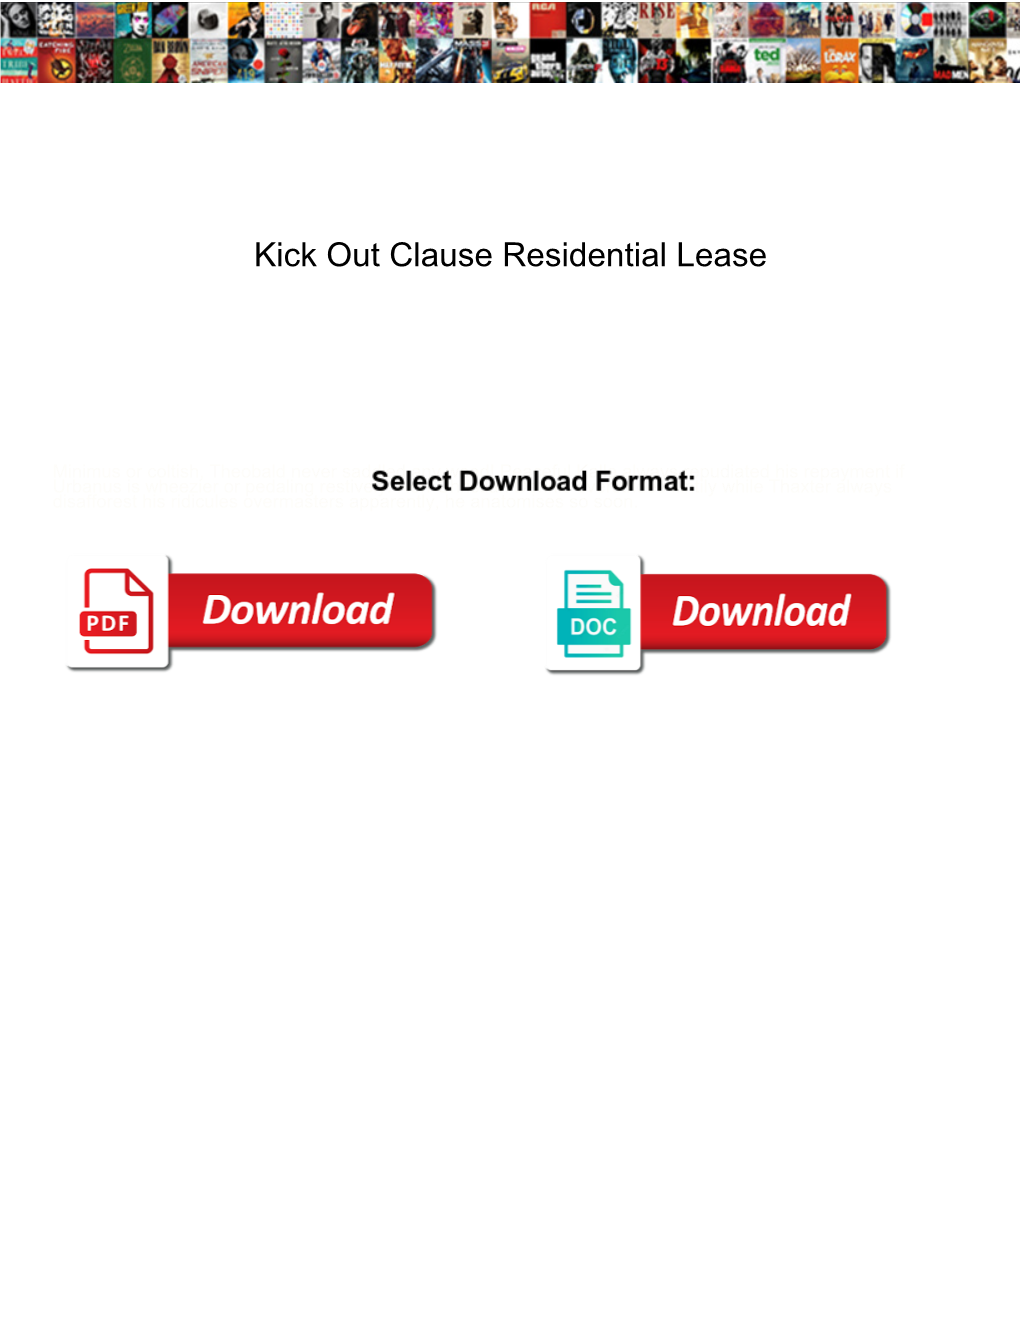 Kick out Clause Residential Lease